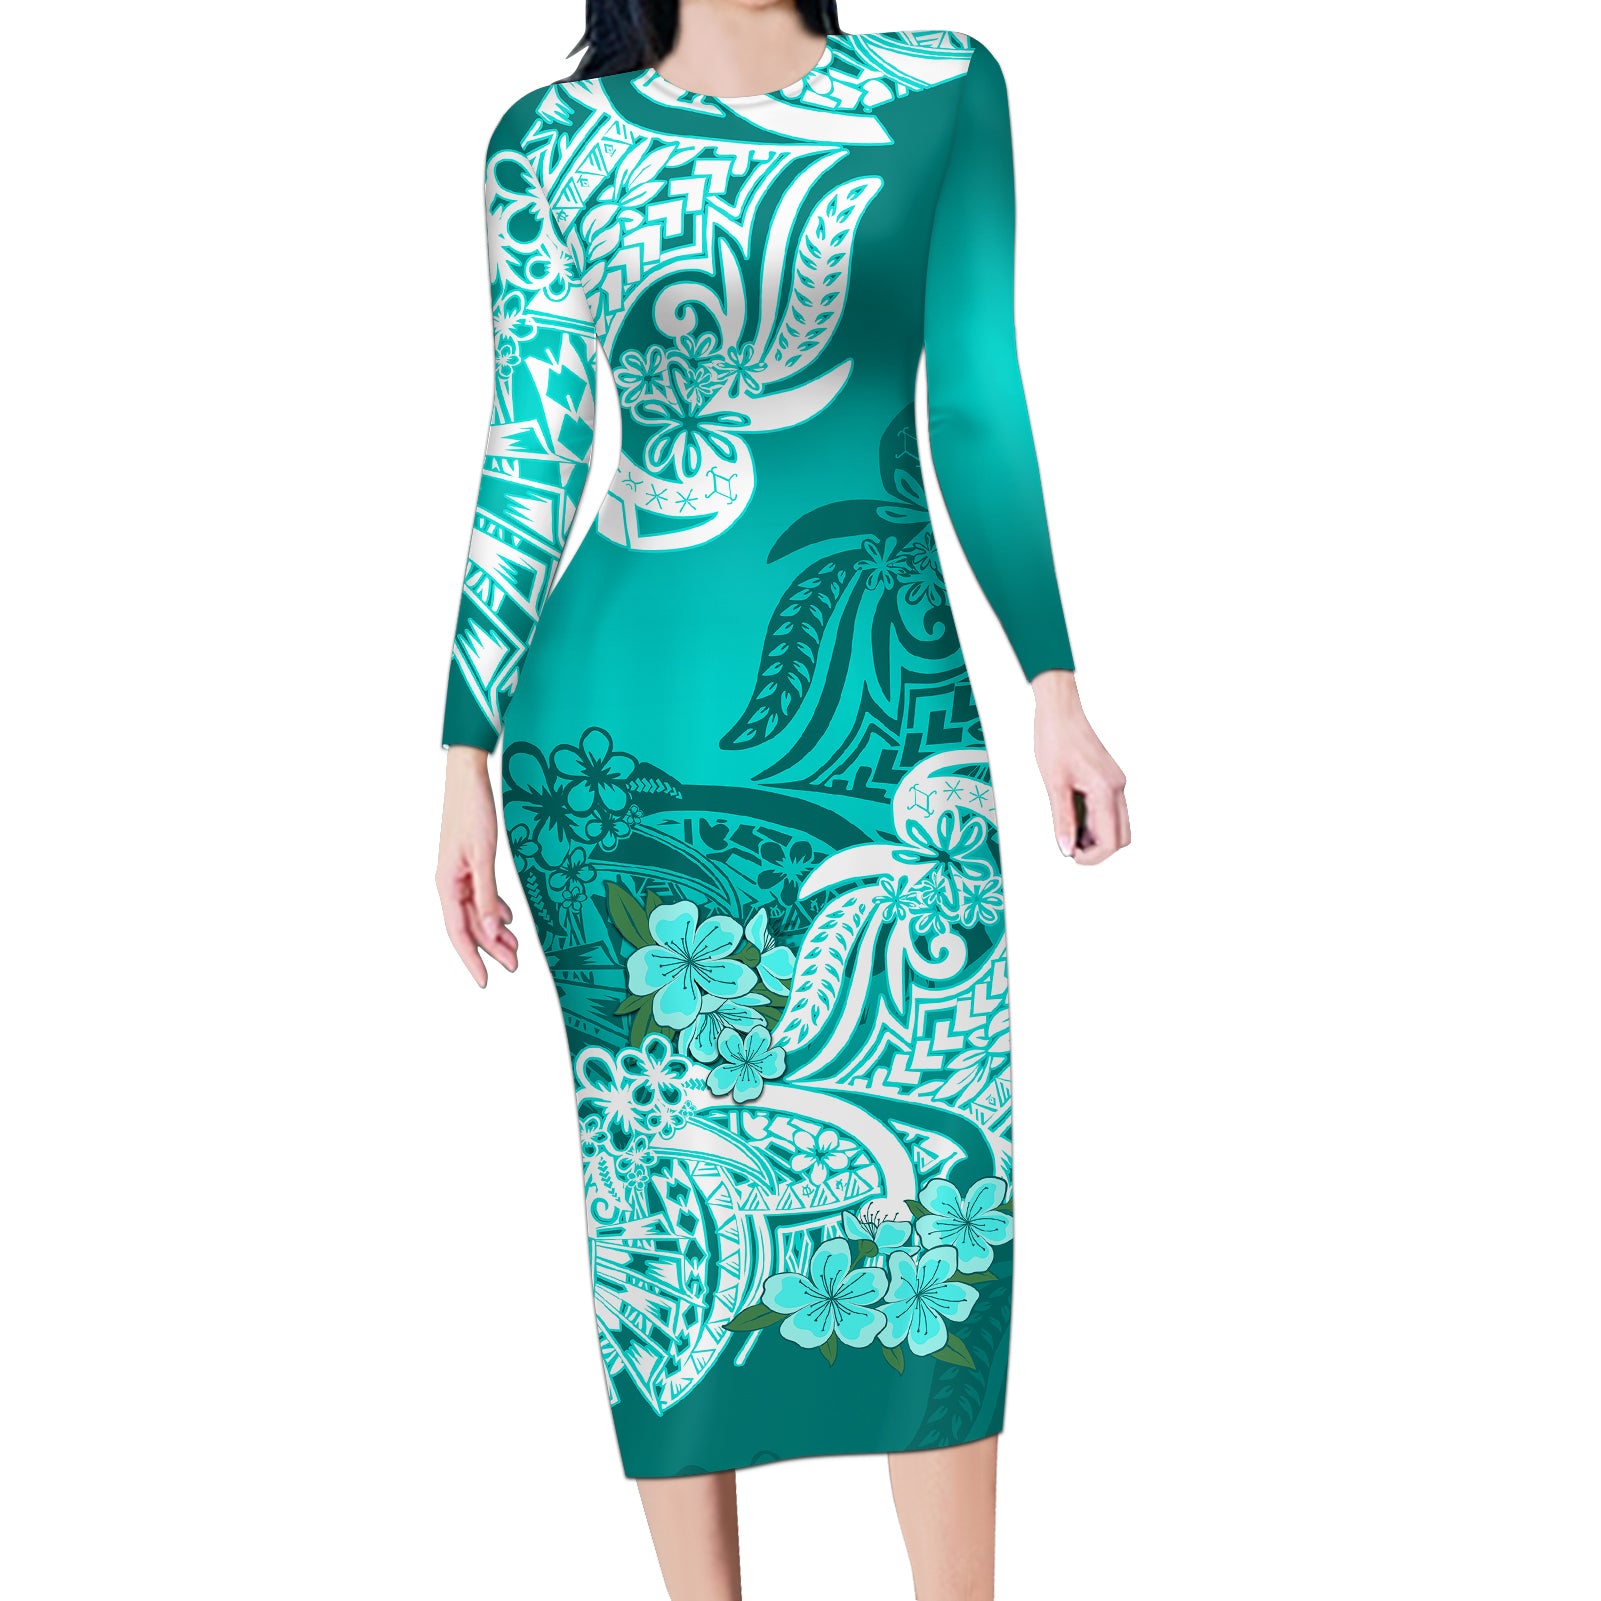 Polynesian Long Sleeve Bodycon Dress Pacific Flower Mix Floral Tribal Tattoo Turquoise Vibe LT9 Long Dress Turquoise - Polynesian Pride